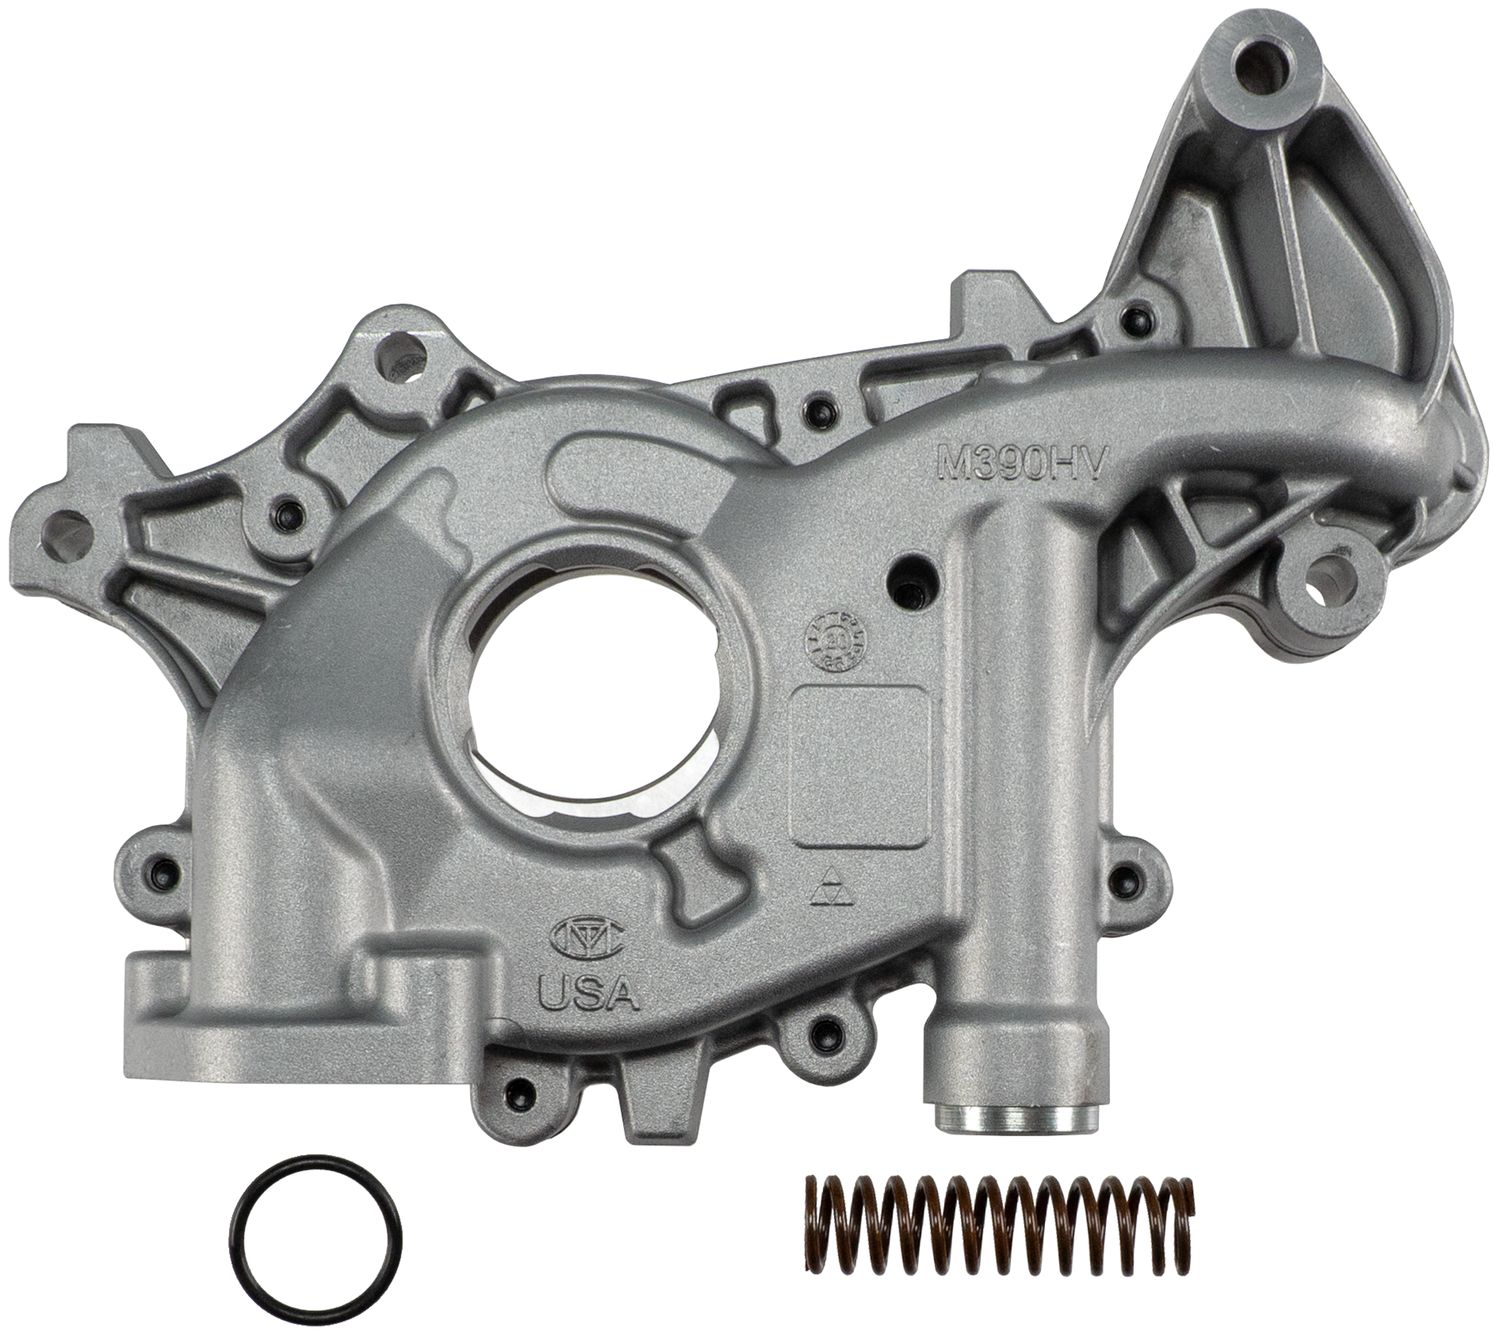 Melling M390HV Hi Volume Oil Pump 3.5 3.7 fits Various F150 Edge Explorer Expedition Fusion and others Fits select: 2011-2019 FORD EXPLORER, 2011-2017 FORD F150 - image 1 of 4